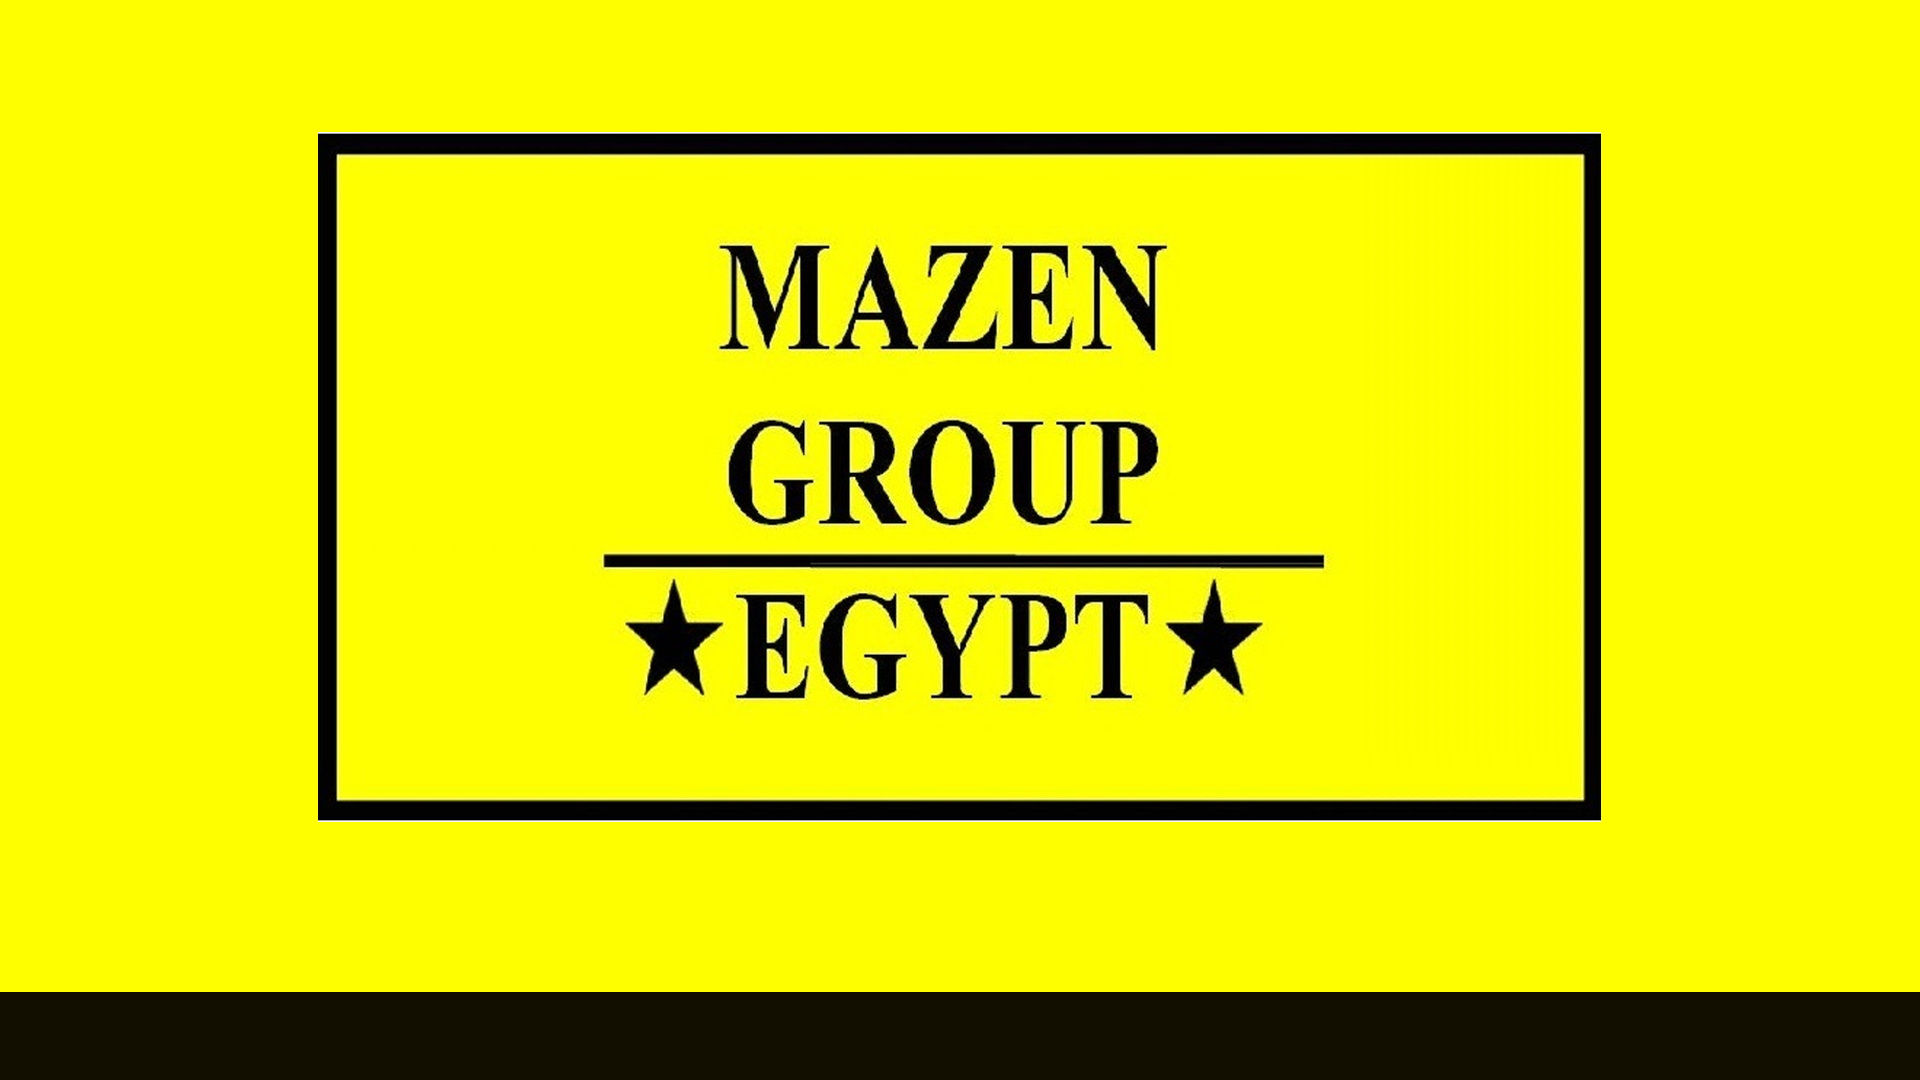 TV interview with the Engineer. Walid Mazen, owner of Mazen Group - Egypt